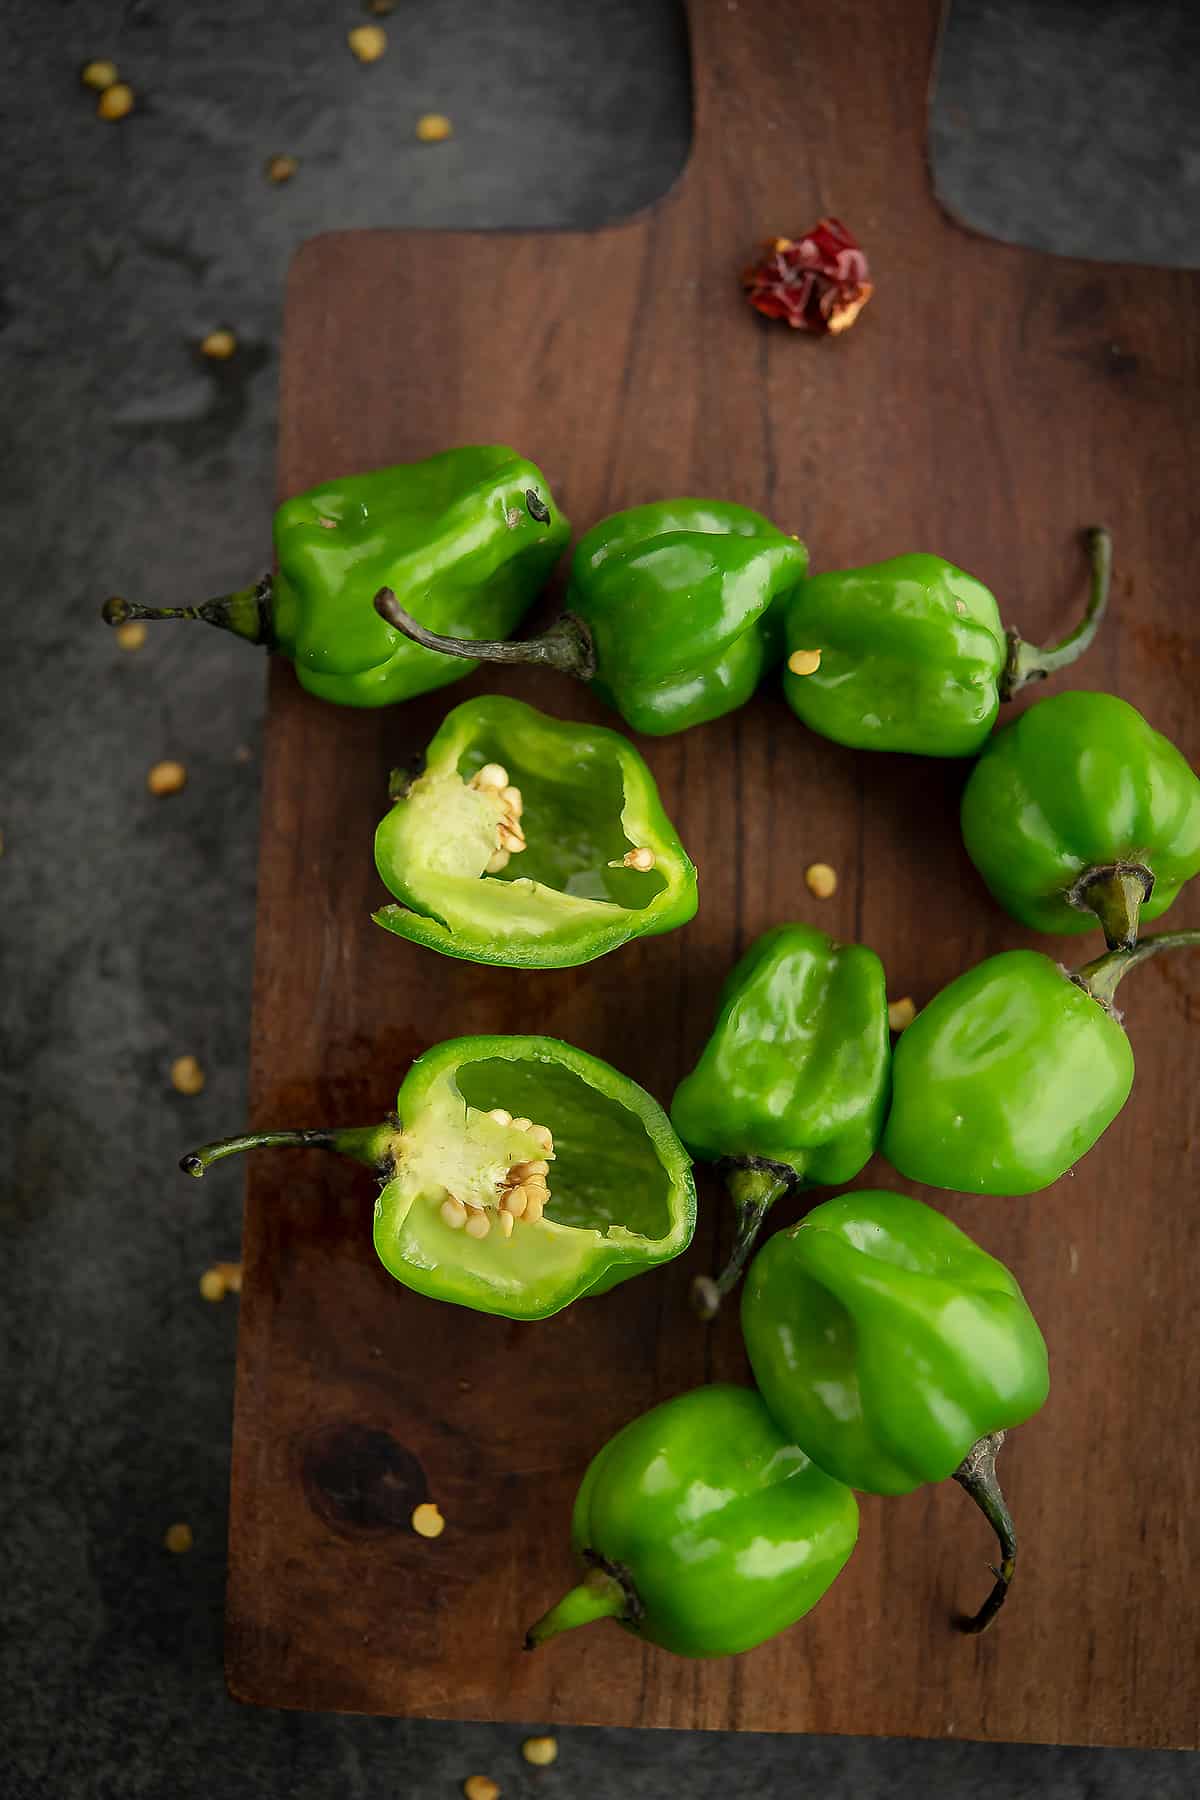 scotch bonnet peppers placed in a wooden board